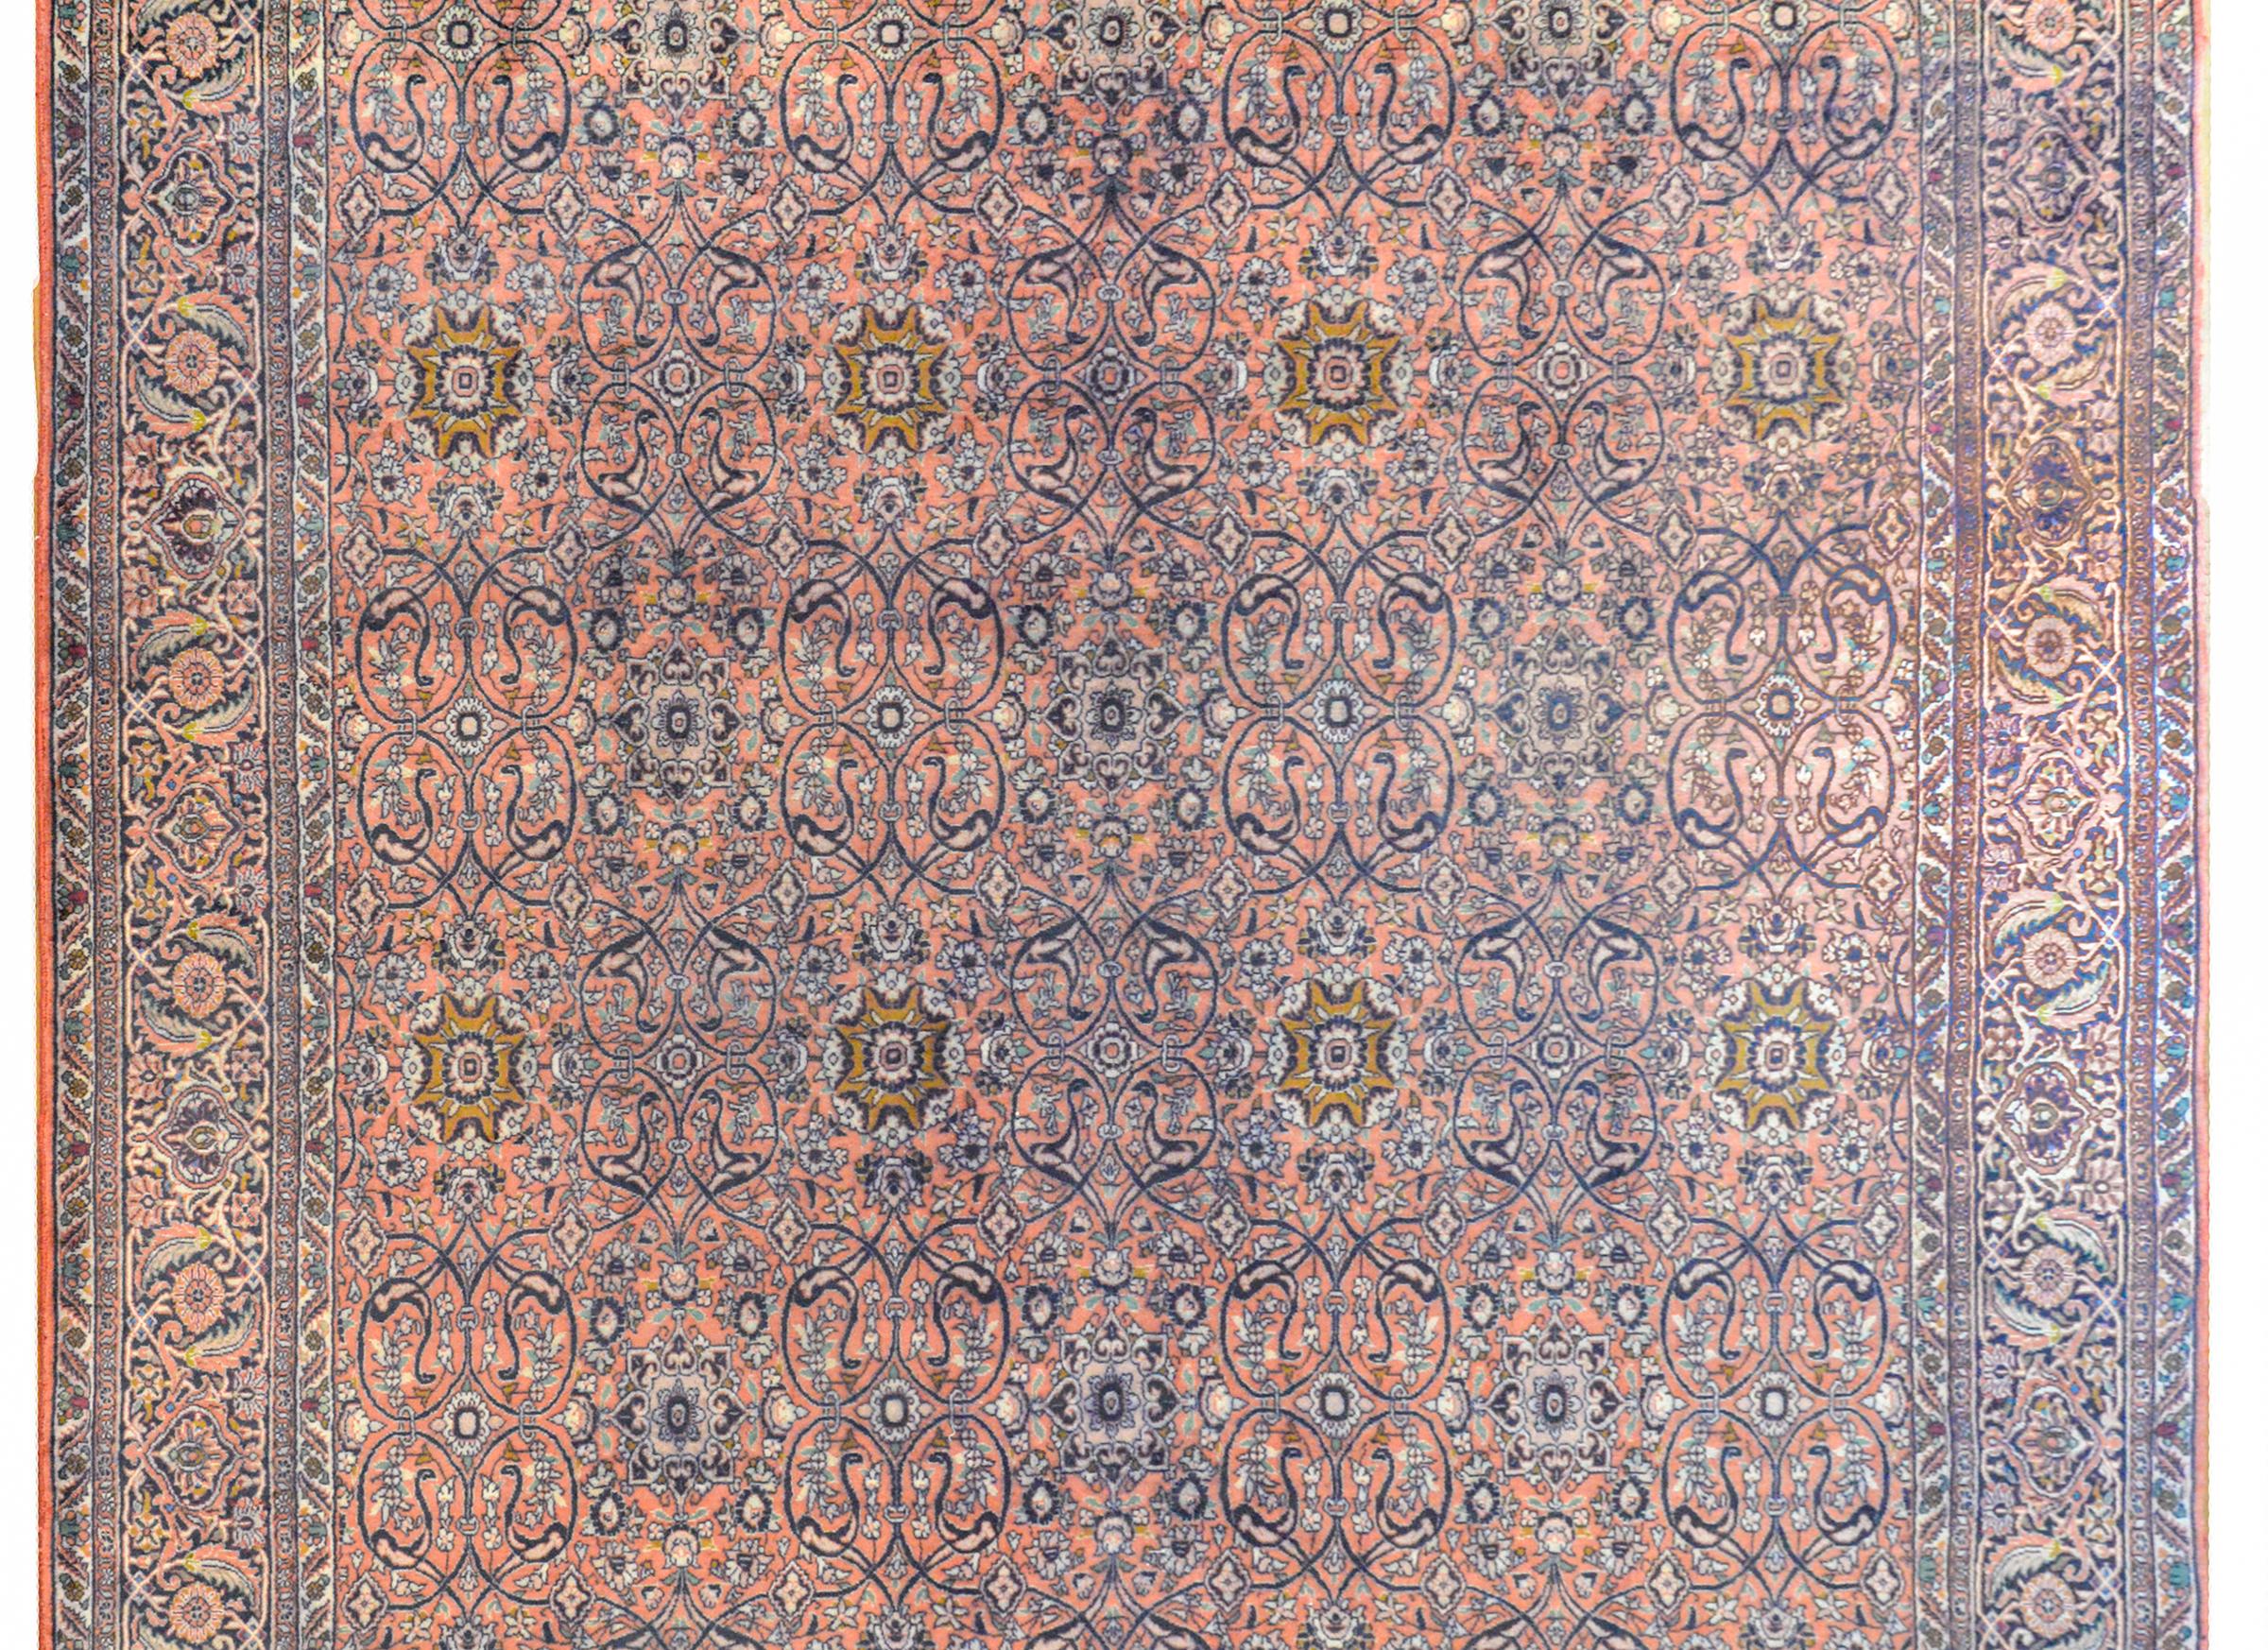 A beautiful vintage Persian Bidjar rug with an all-over trellis floral pattern with scrolling vines and large gold flowers woven in light and dark indigo, pink, and turquoise, against a salmon colored background. The border is wonderful with a